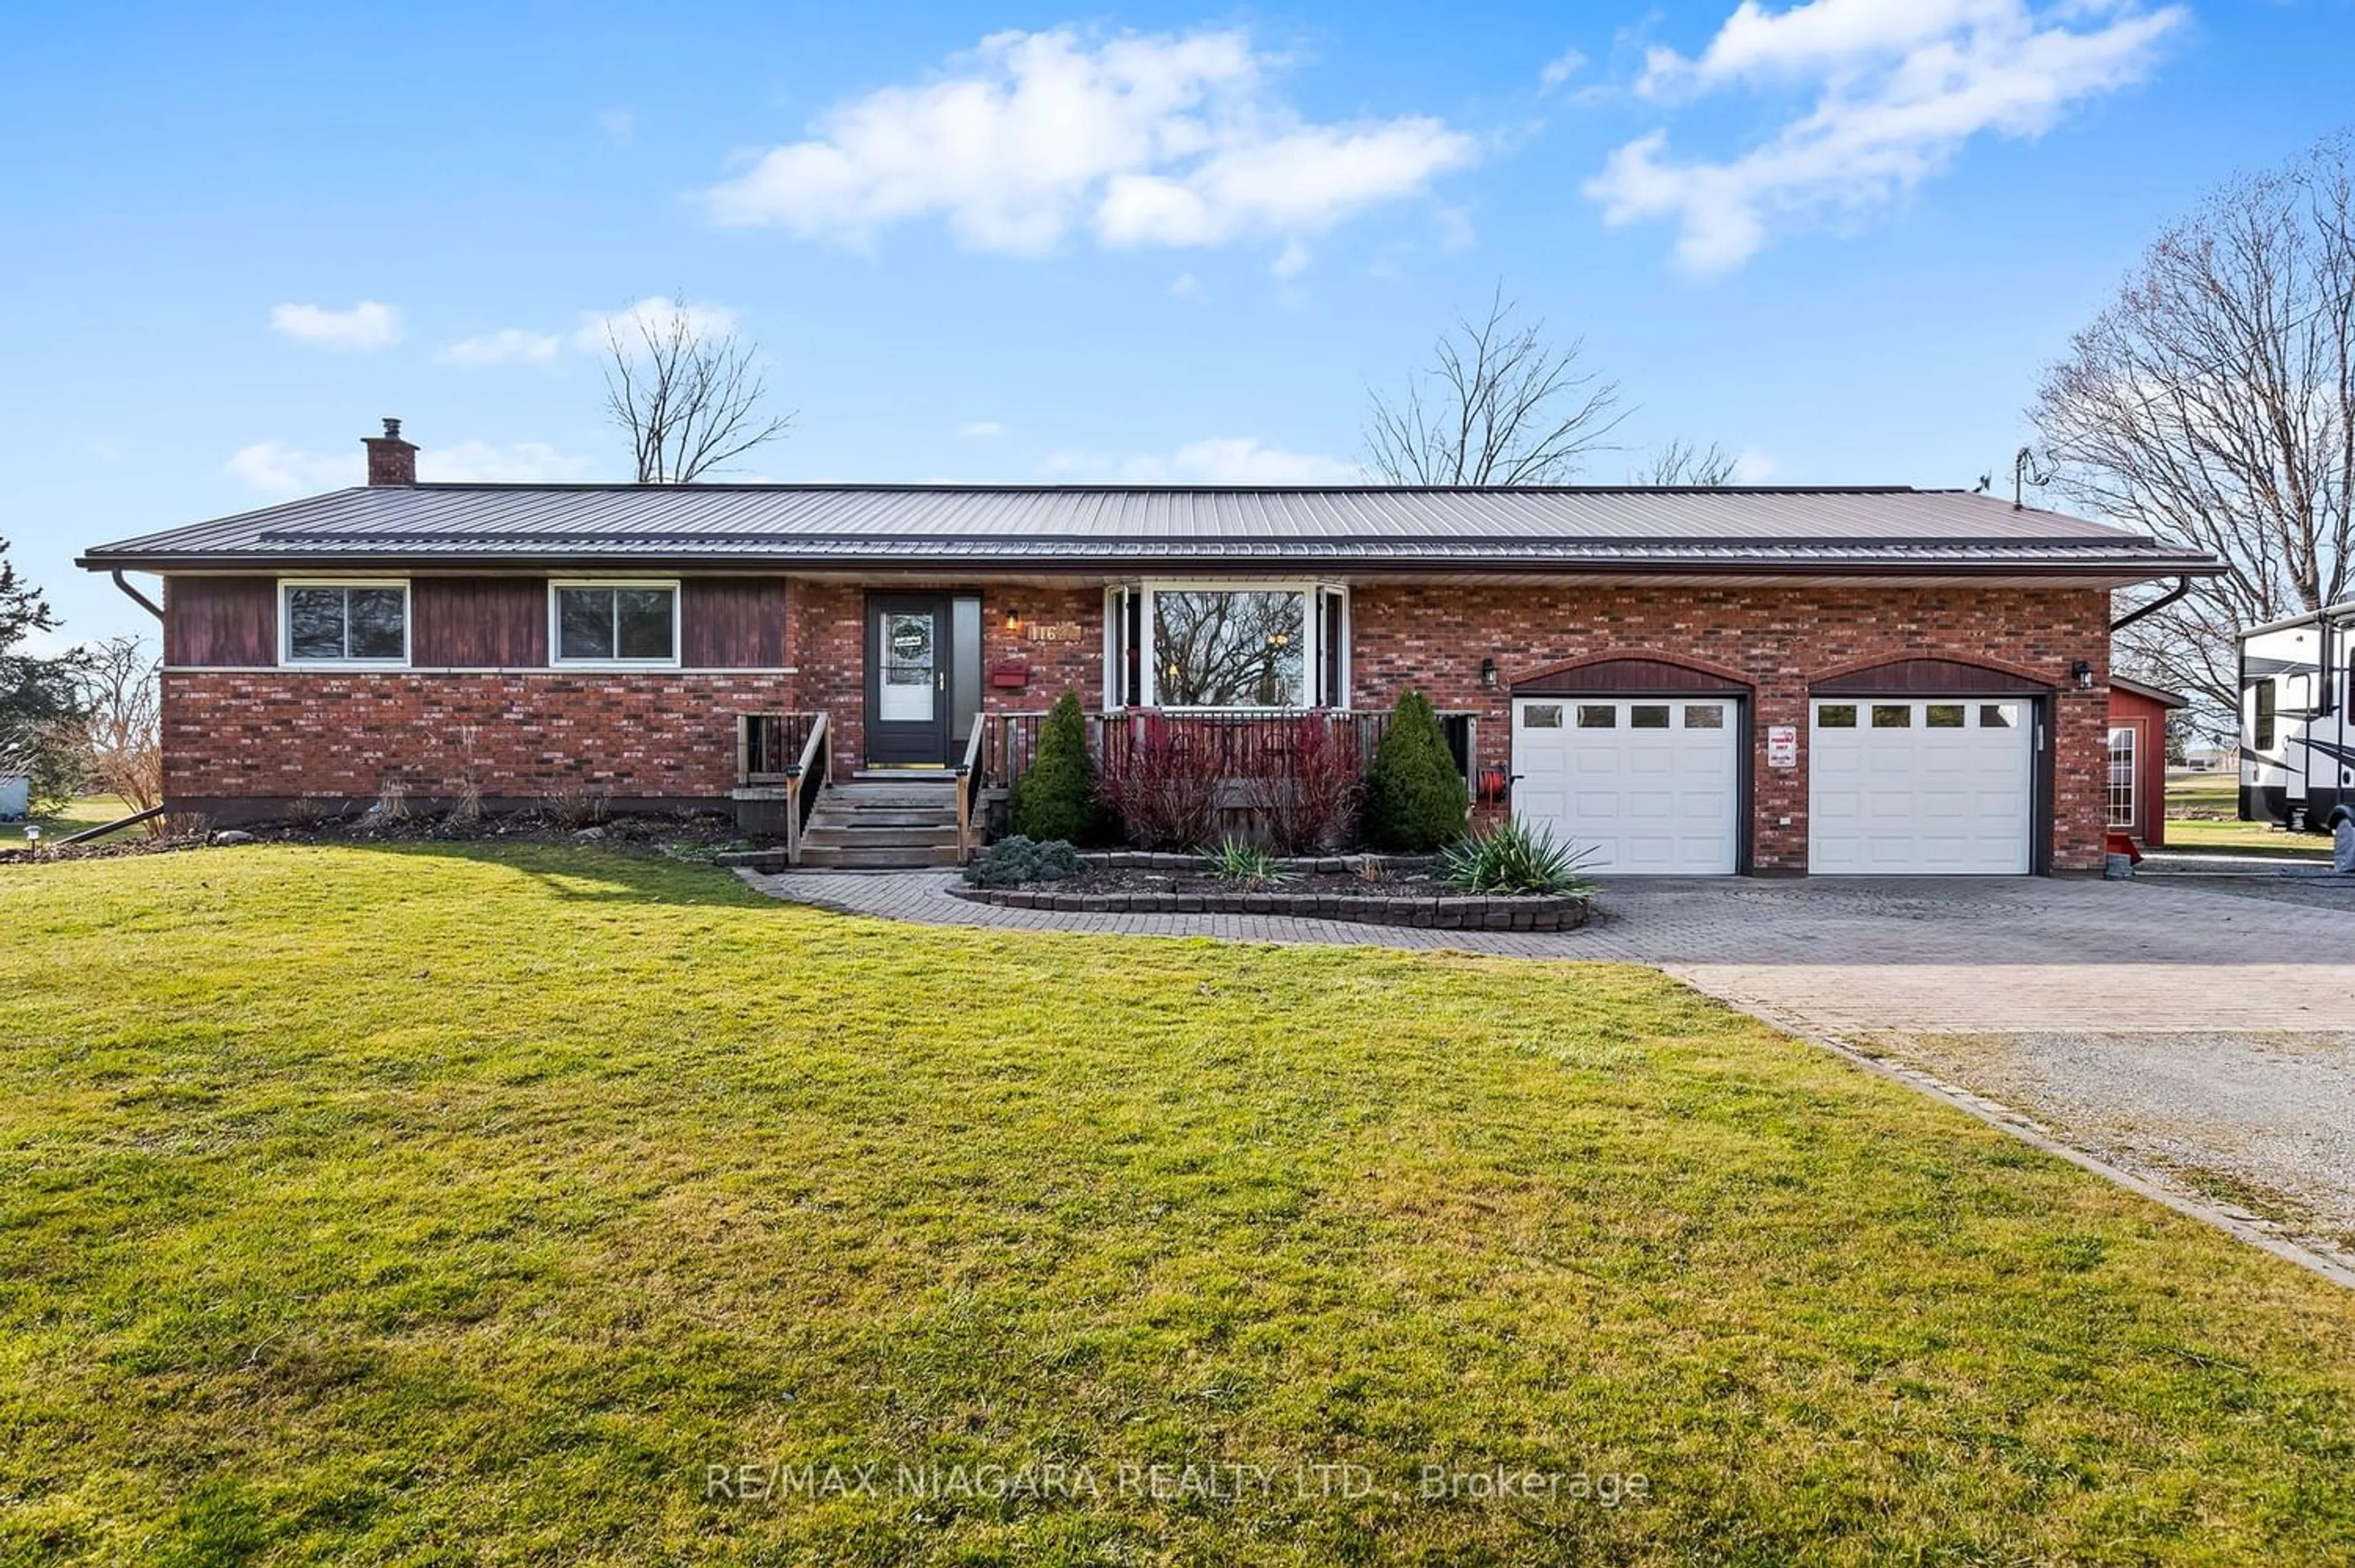 Home with brick exterior material for 11620 Elizabeth Cres, Wainfleet Ontario L0S 1V0